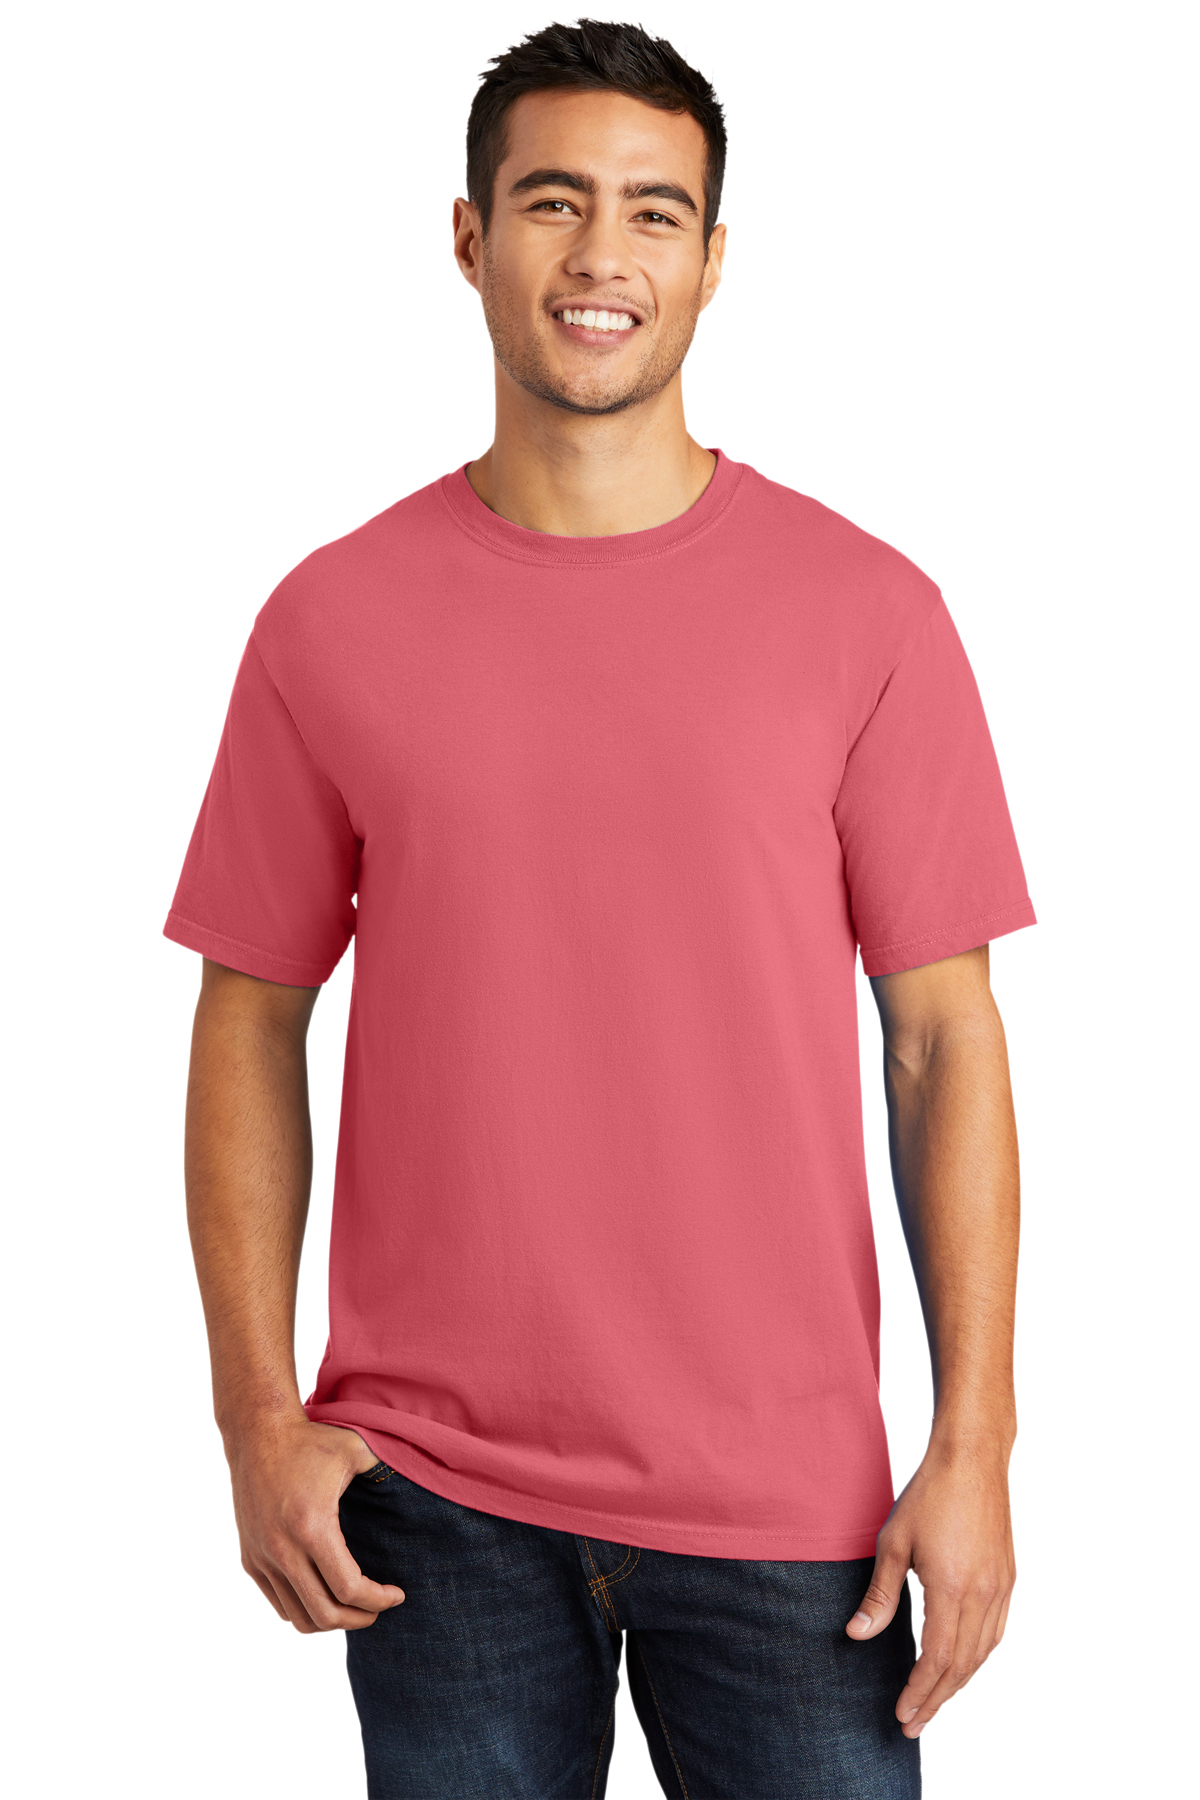 Port & Company Beach Wash Garment-Dyed Tee | Product | Company Casuals